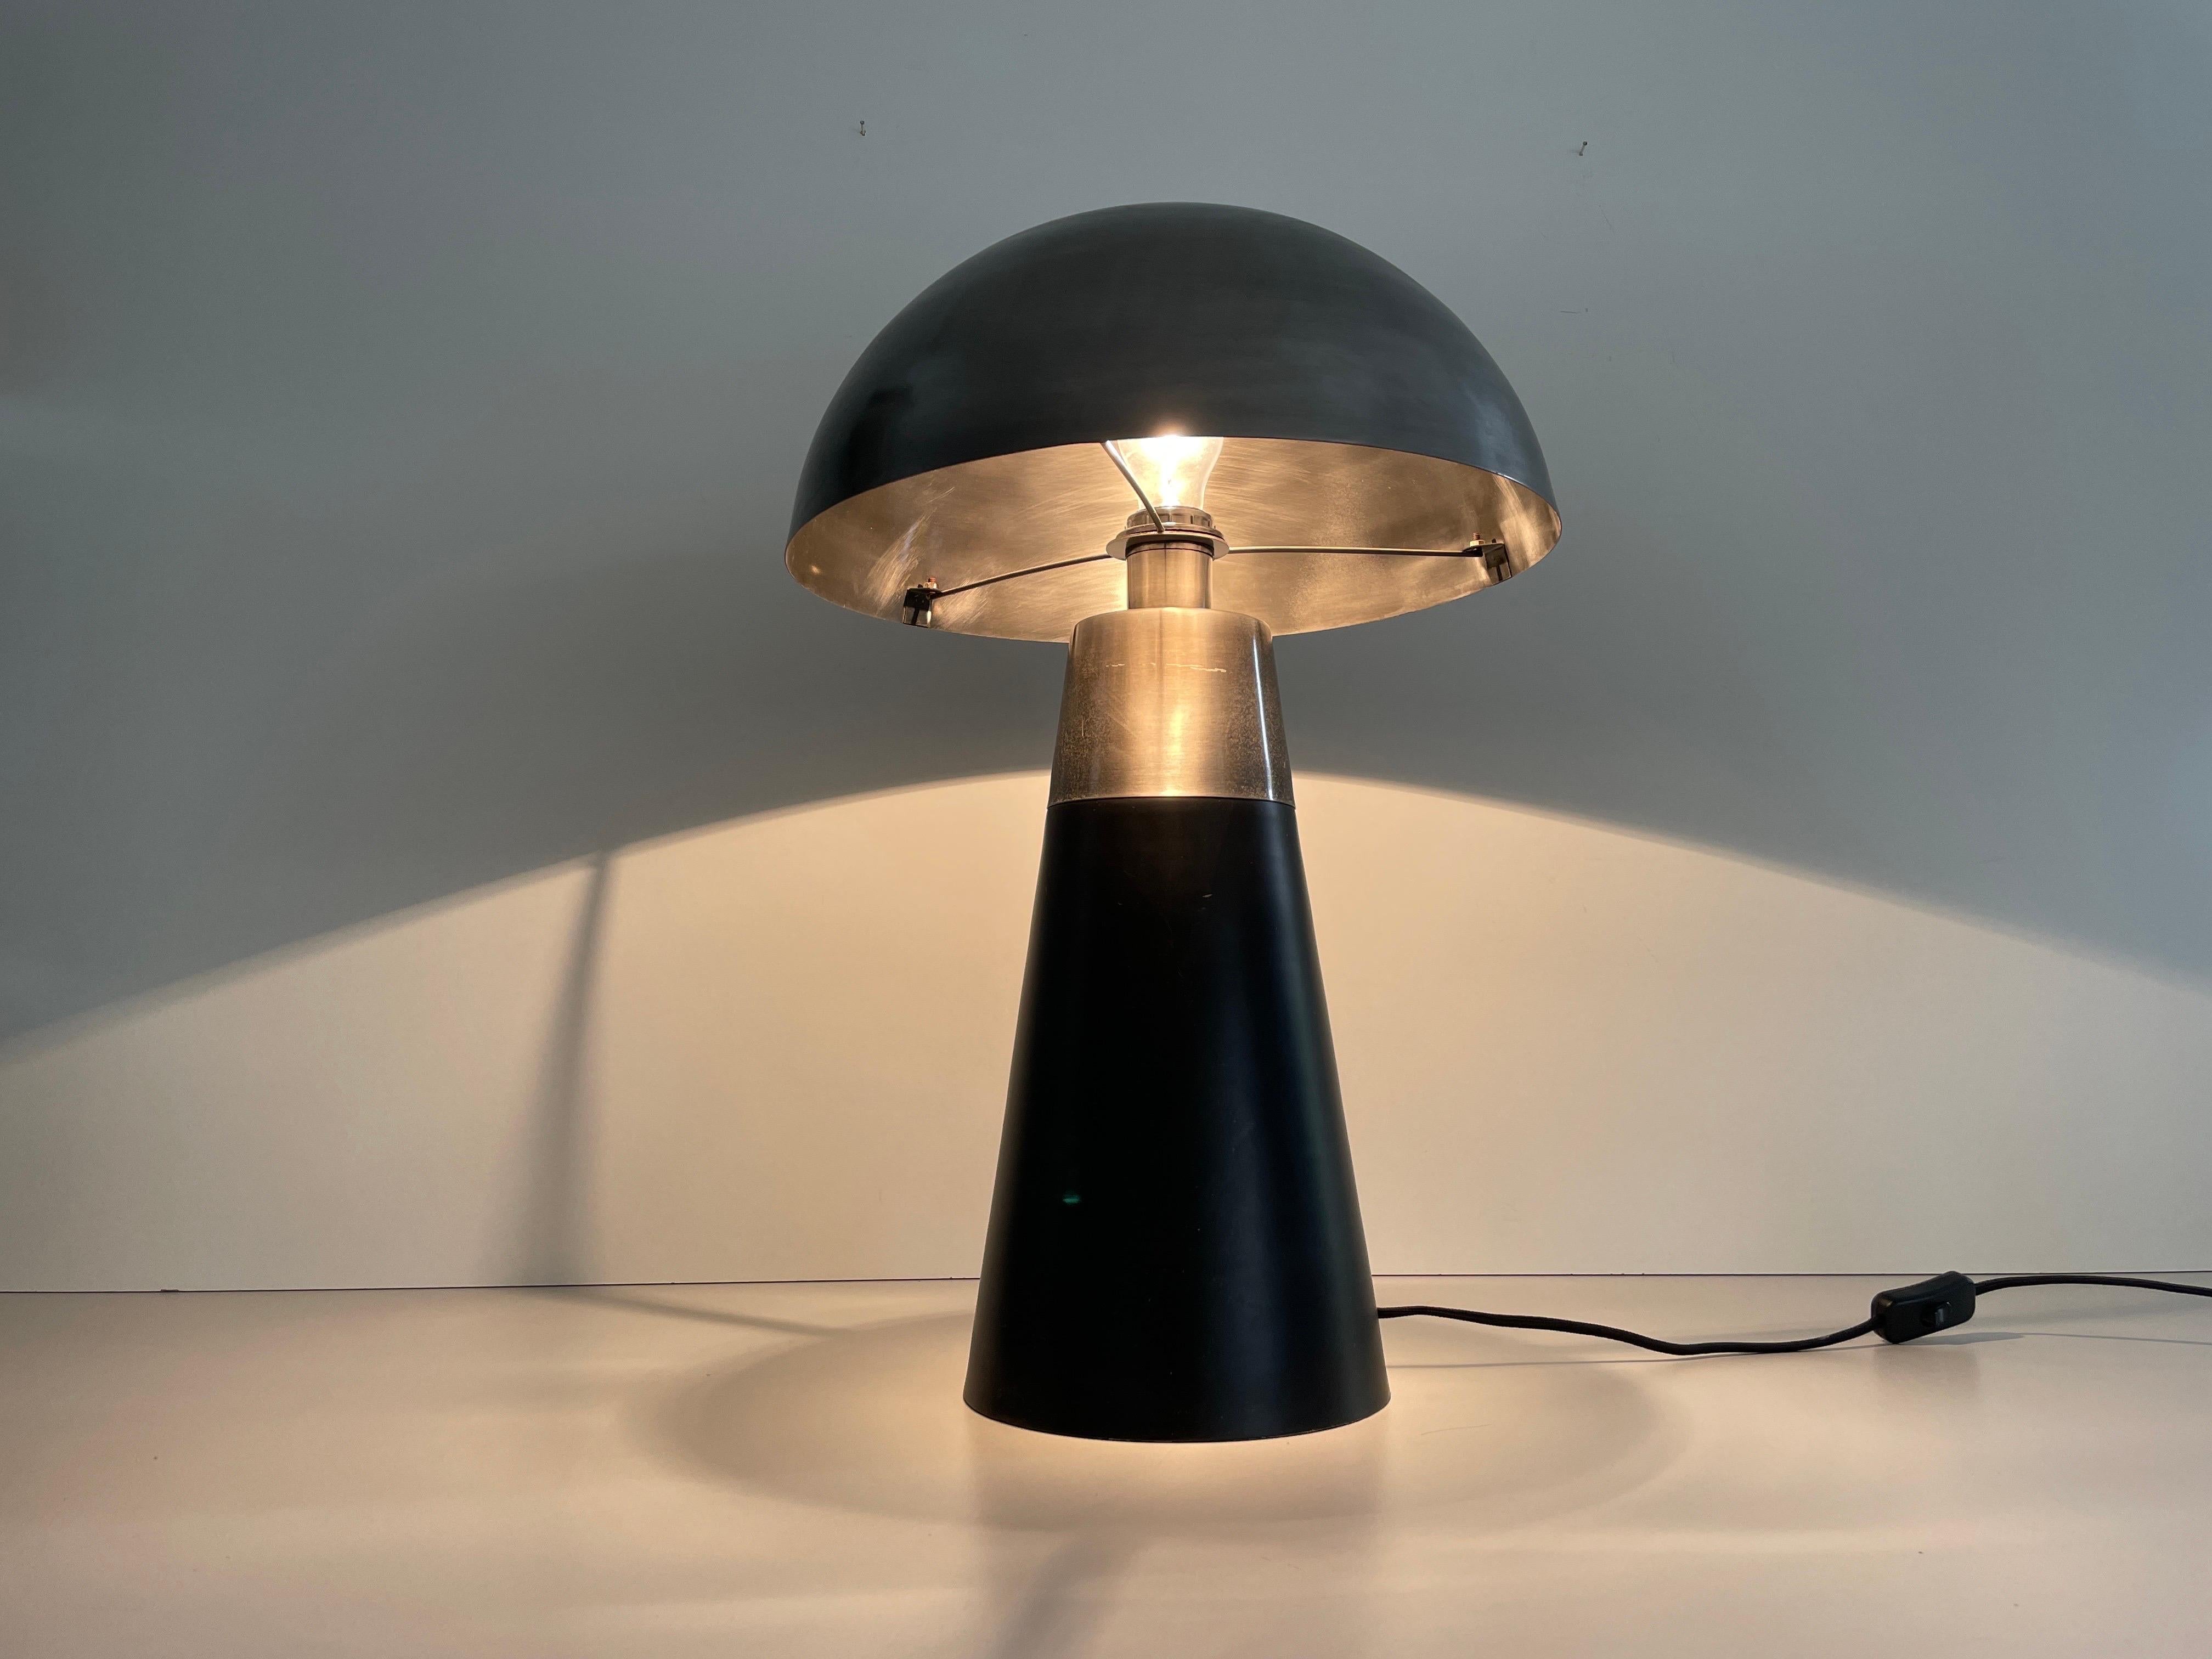 Muschroom and Conic Design Large Table Lamp by LAMBERT, 1980s, Germany For Sale 4